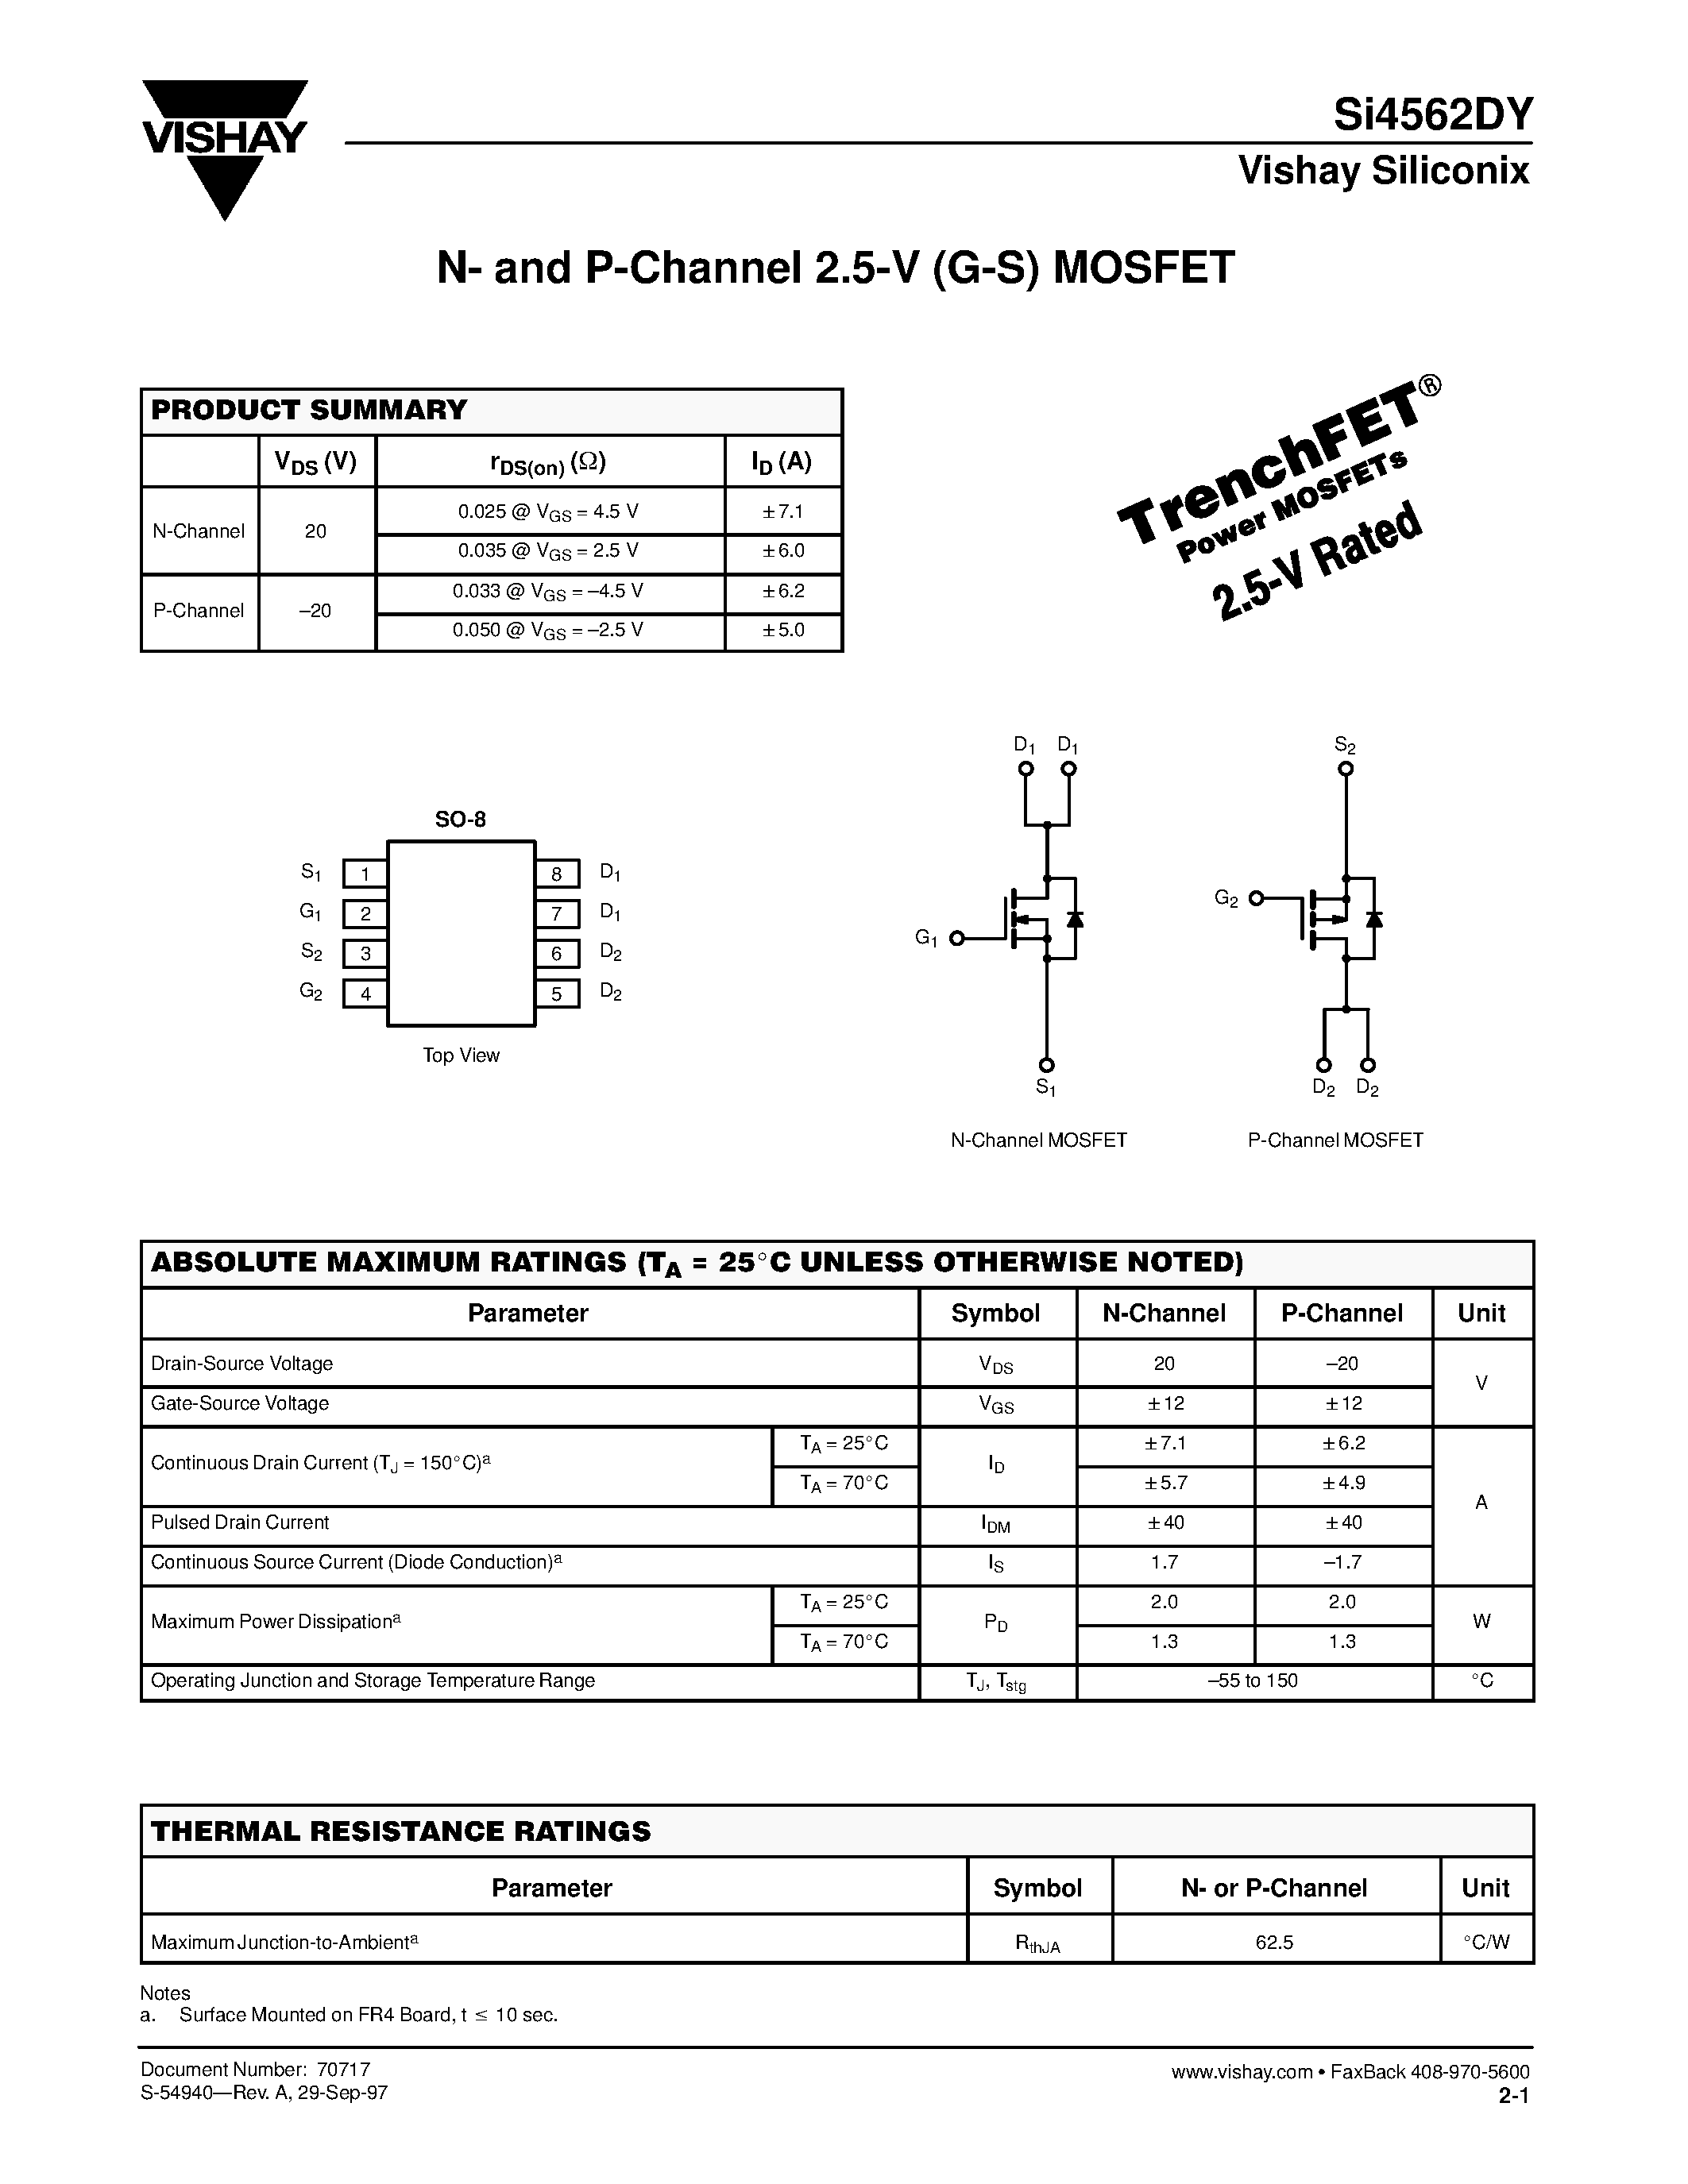 Даташит SI4562DY - N- and P-Channel 2.5-V (G-S) MOSFET страница 1